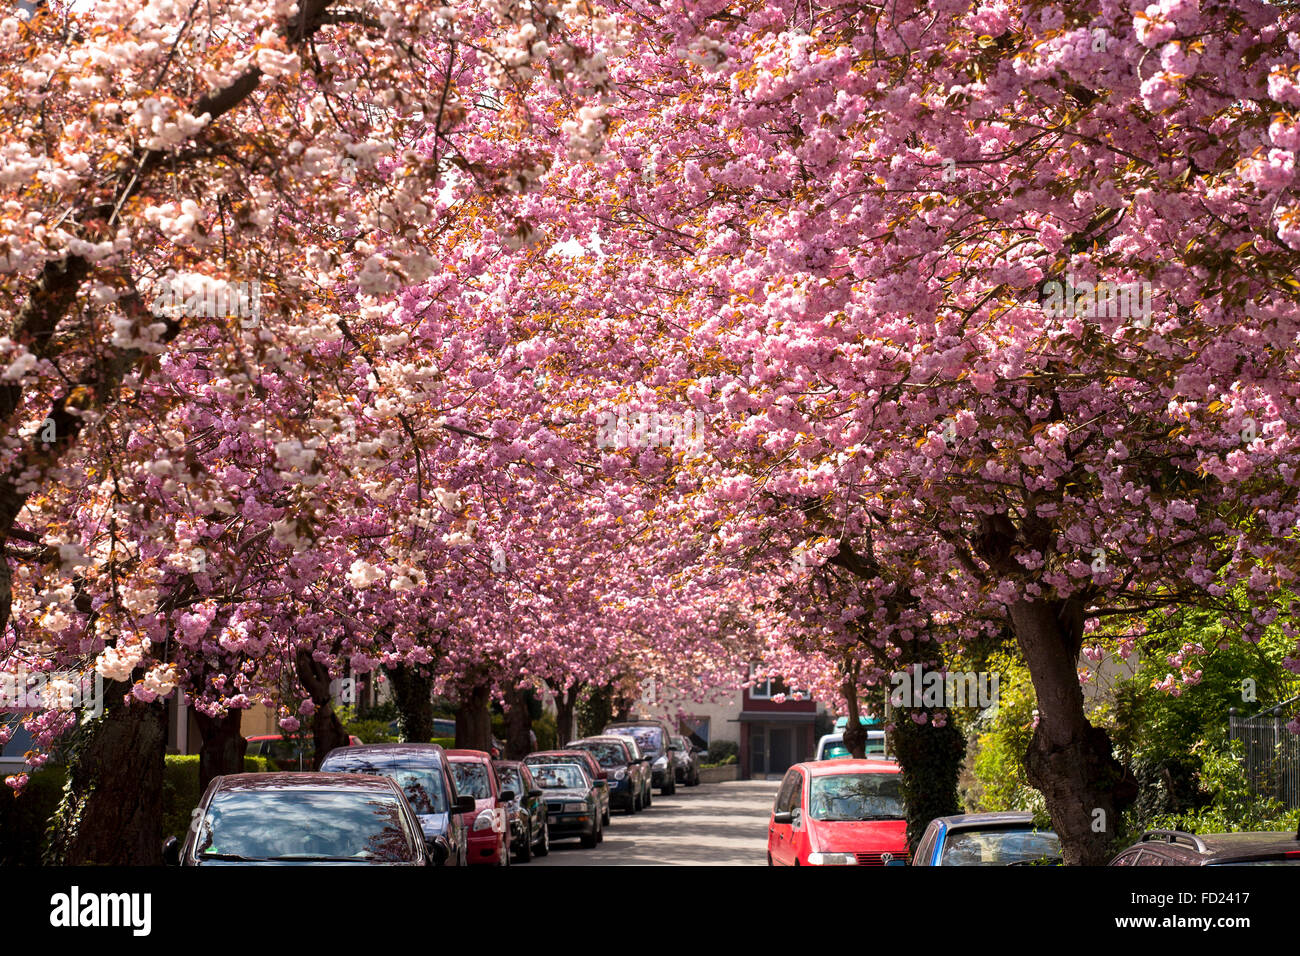 Europe, Germany, North Rhine-Westphalia, Ruhr Area, Wetter at the river Ruhr, street with blooming cherry trees. Stock Photo